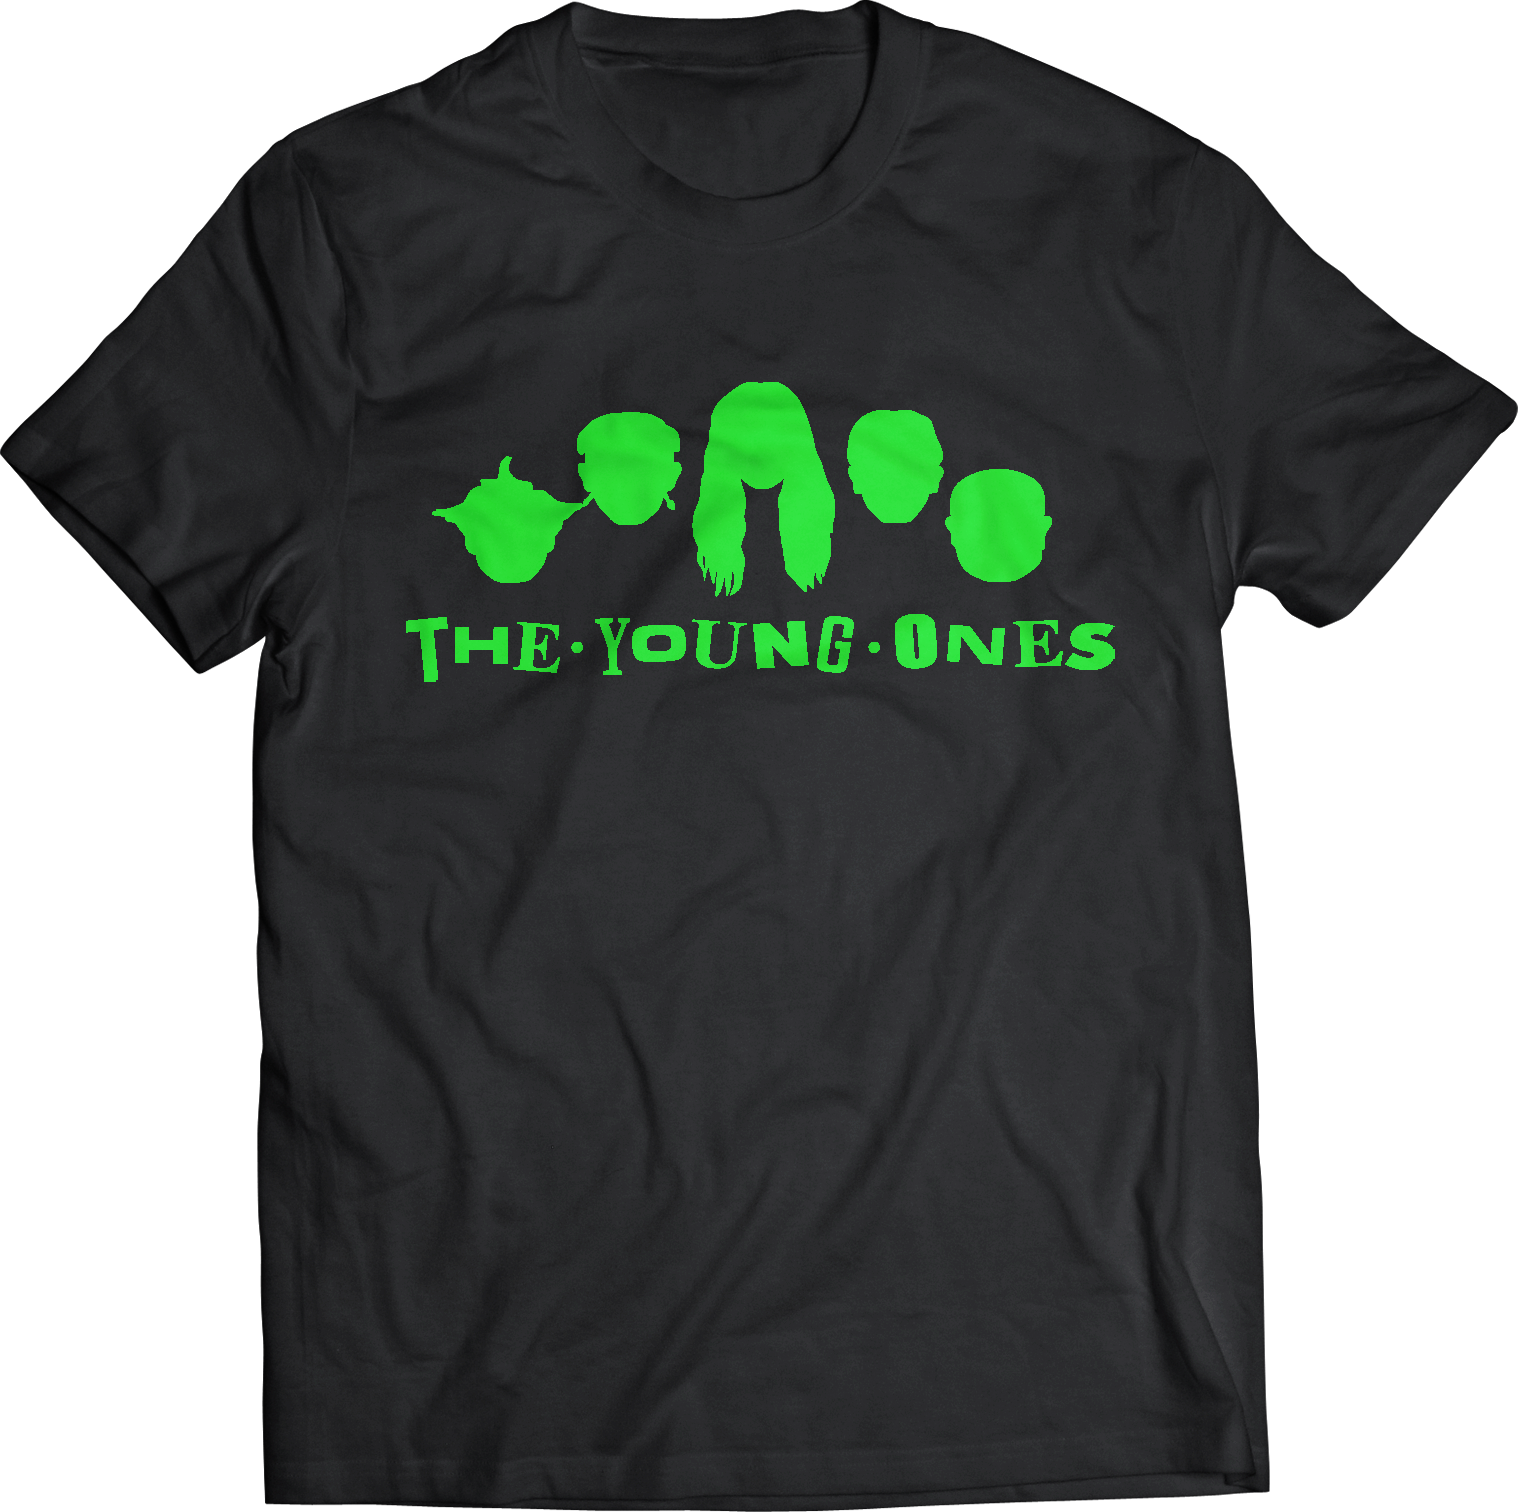 YOUNG ONES "SHILOUETTE" T-SHIRT